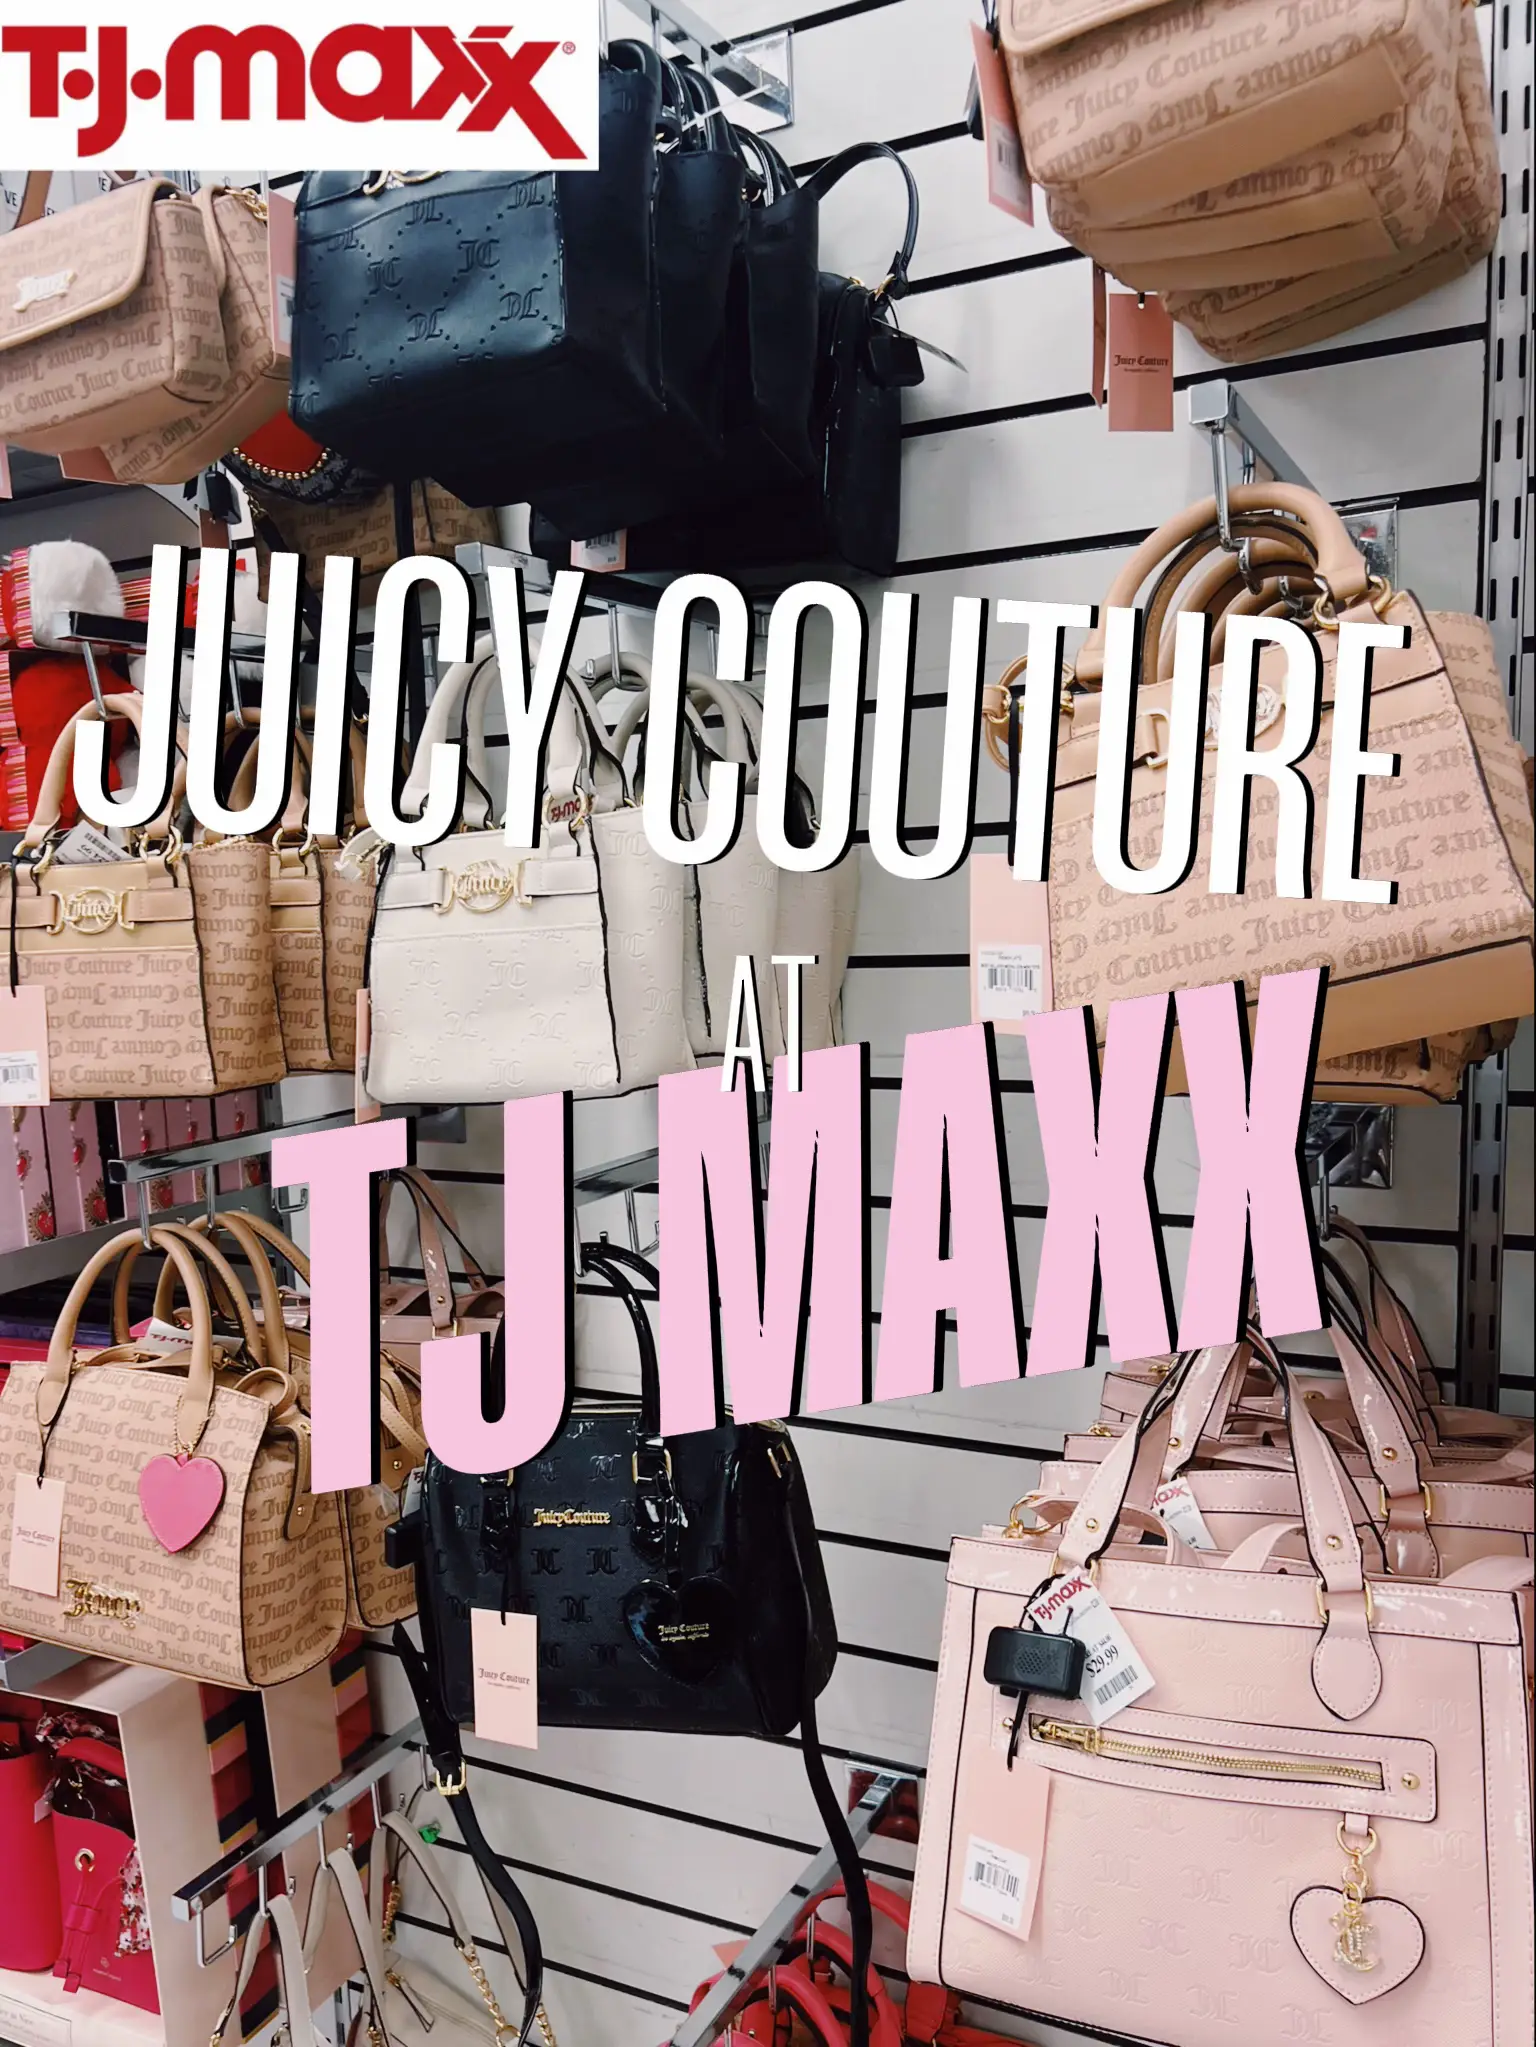 Juicy couture purse/backpack - clothing & accessories - by owner